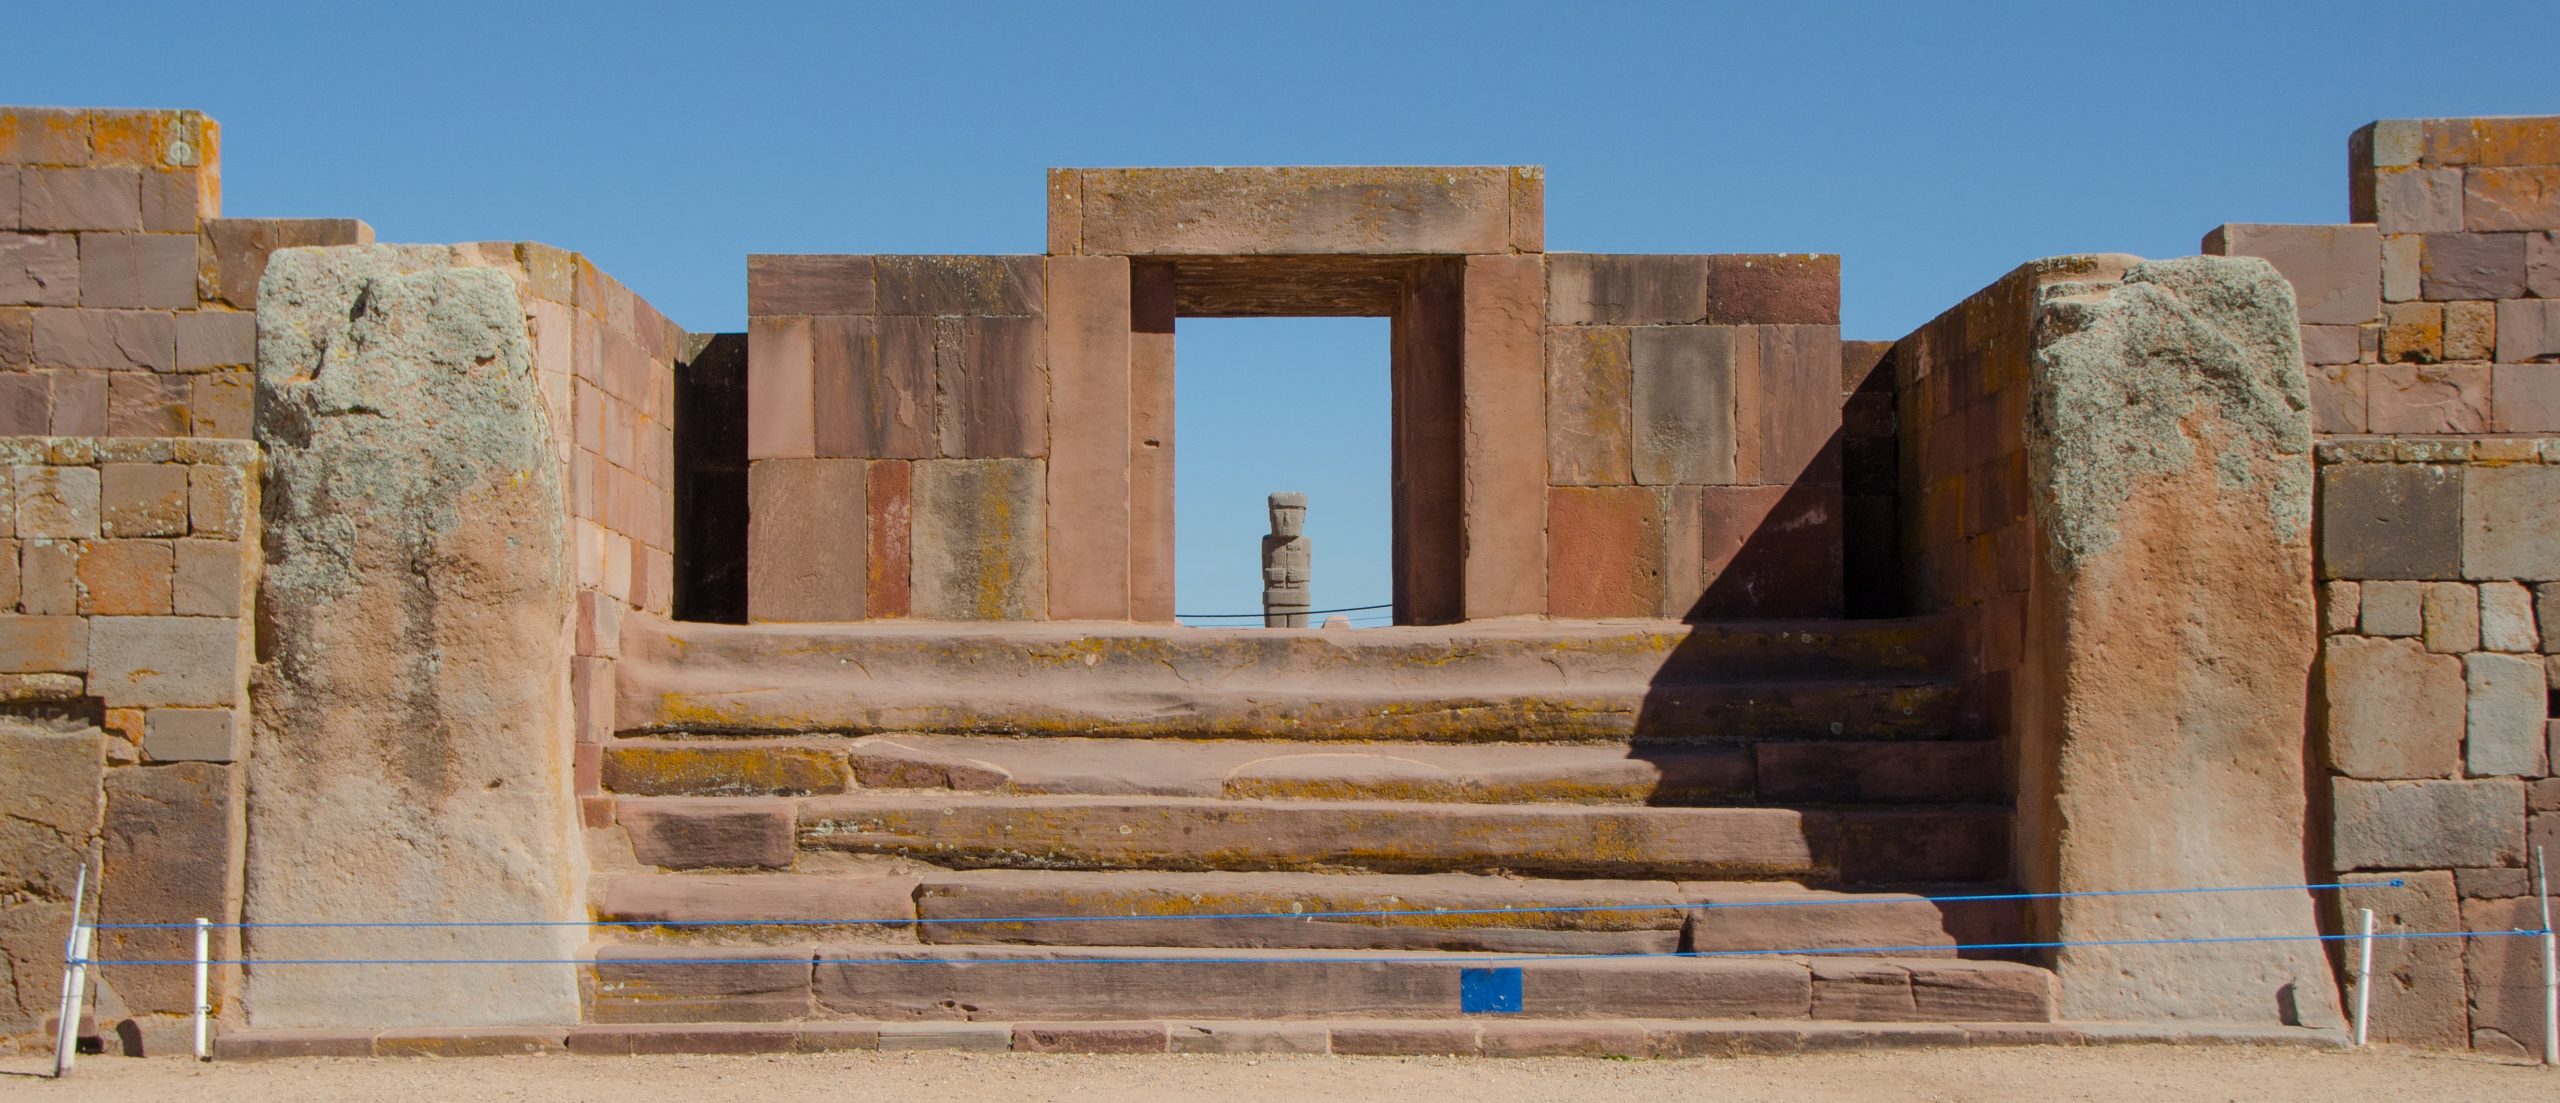 The city of Tiwanaku, capital of a powerful pre-Hispanic empire that dominated a large area of the southern Andes and beyond, reached its apogee between 500 and 900 AD.